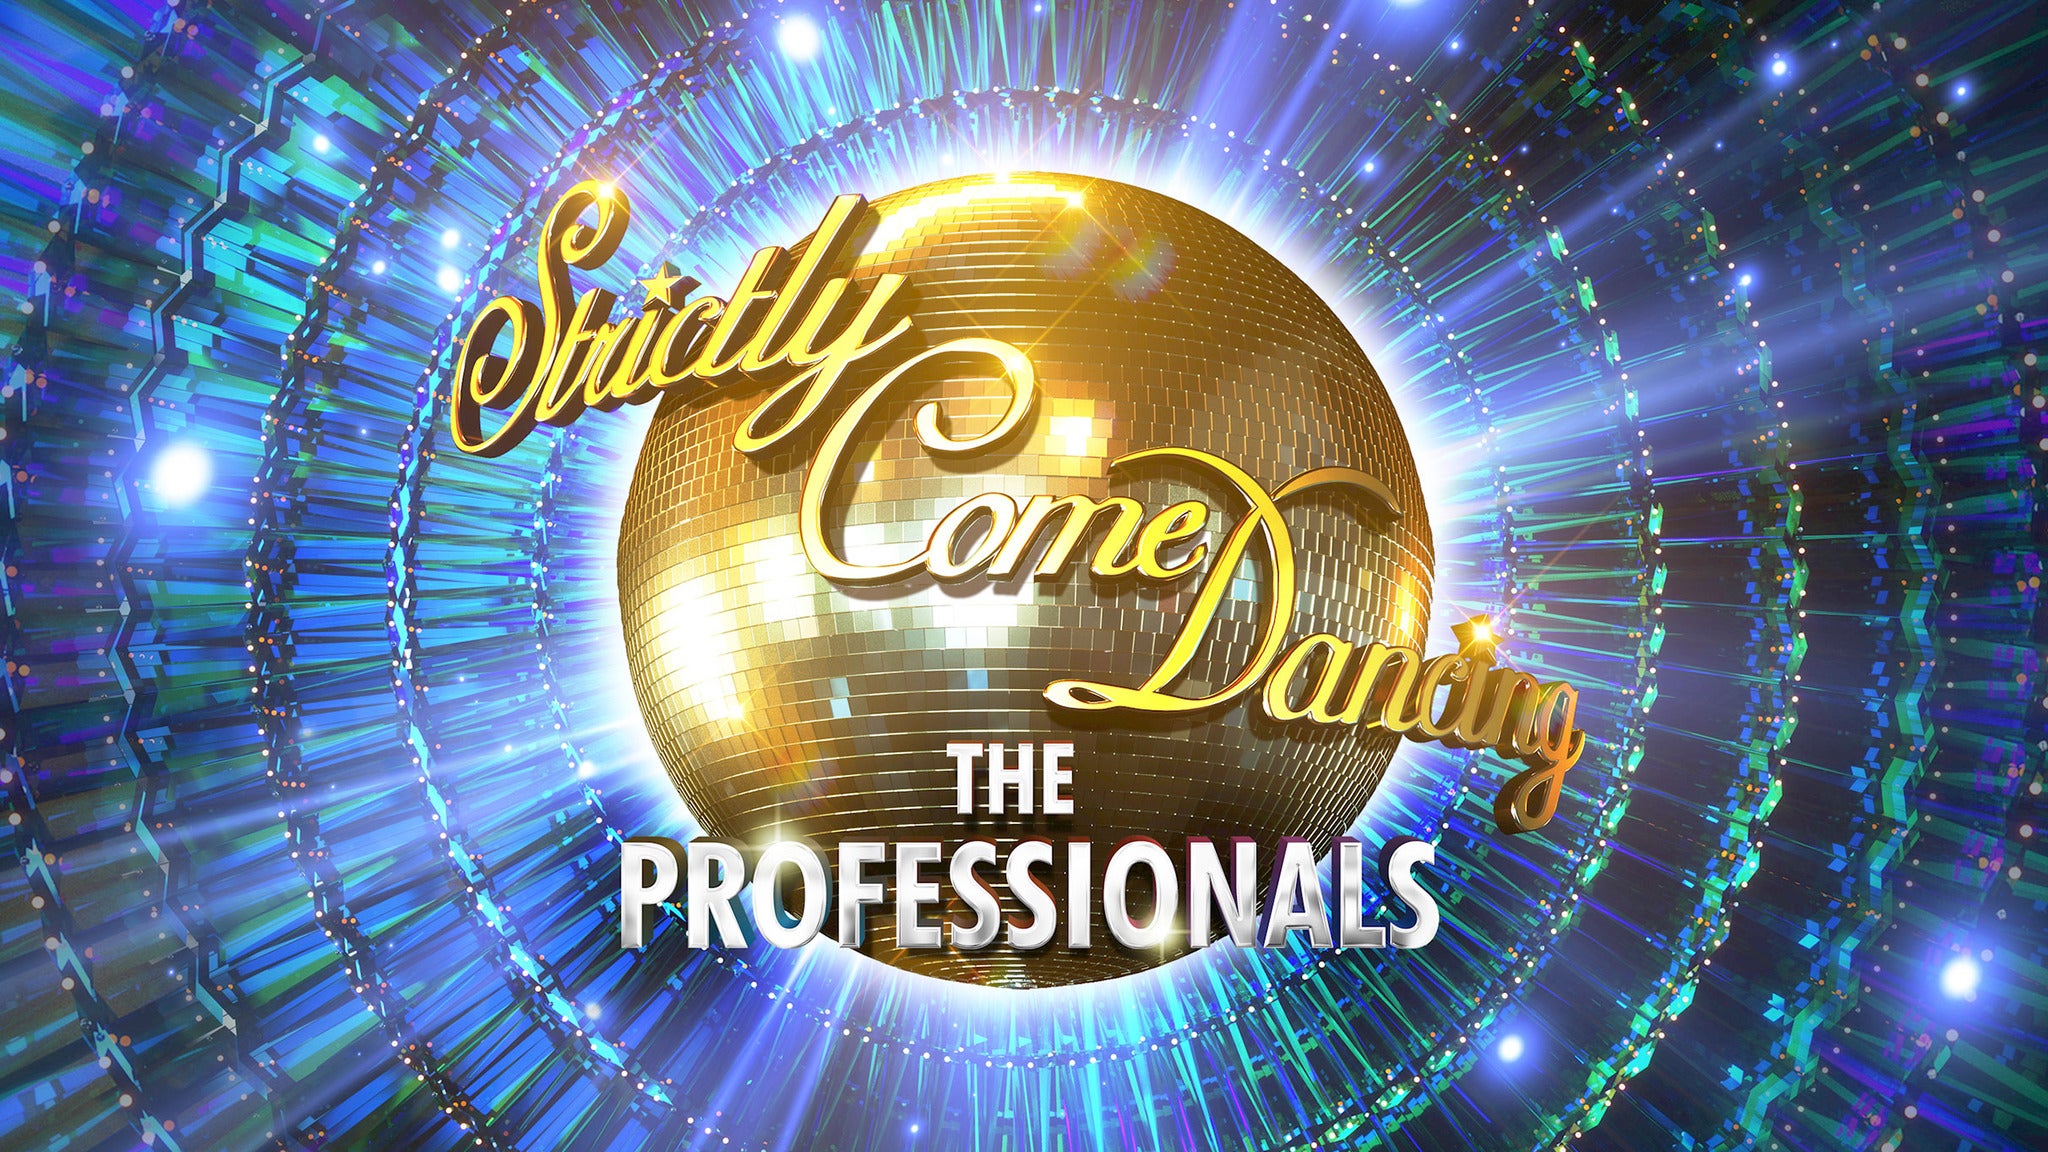 Strictly Come Dancing the Professionals Tour 2020 Event Title Pic